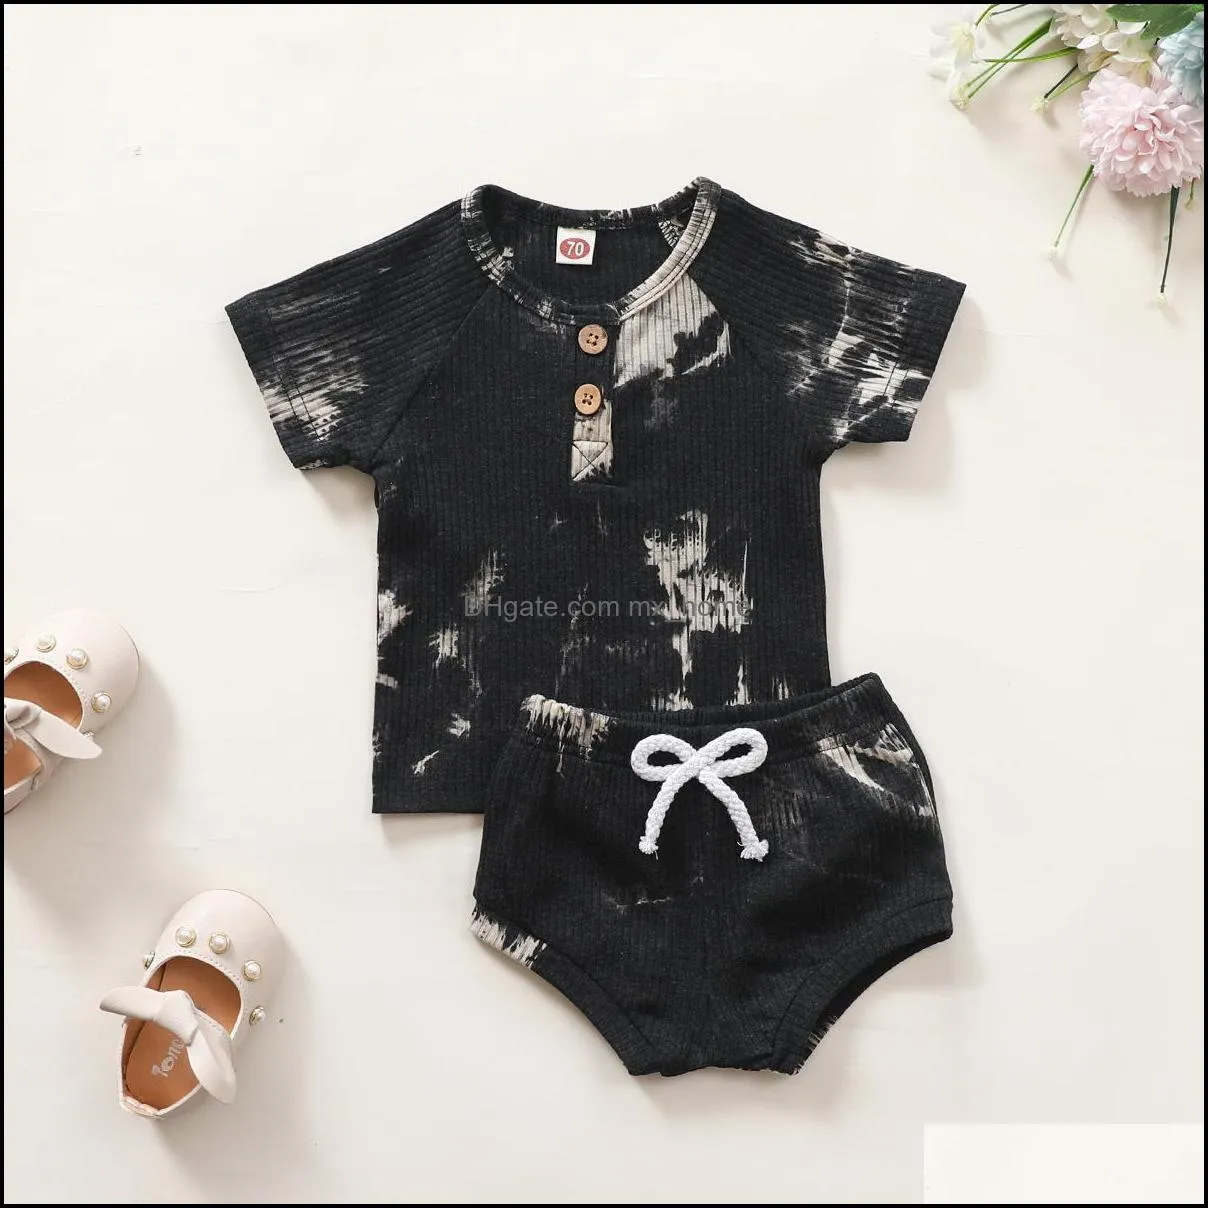 INS Baby Kids Girls Boys Children Clothing Sets Tie Dyed Knitted Cotton Suits Short Sleeve Tops Straps Shorts 2Pieces Summer Outfits